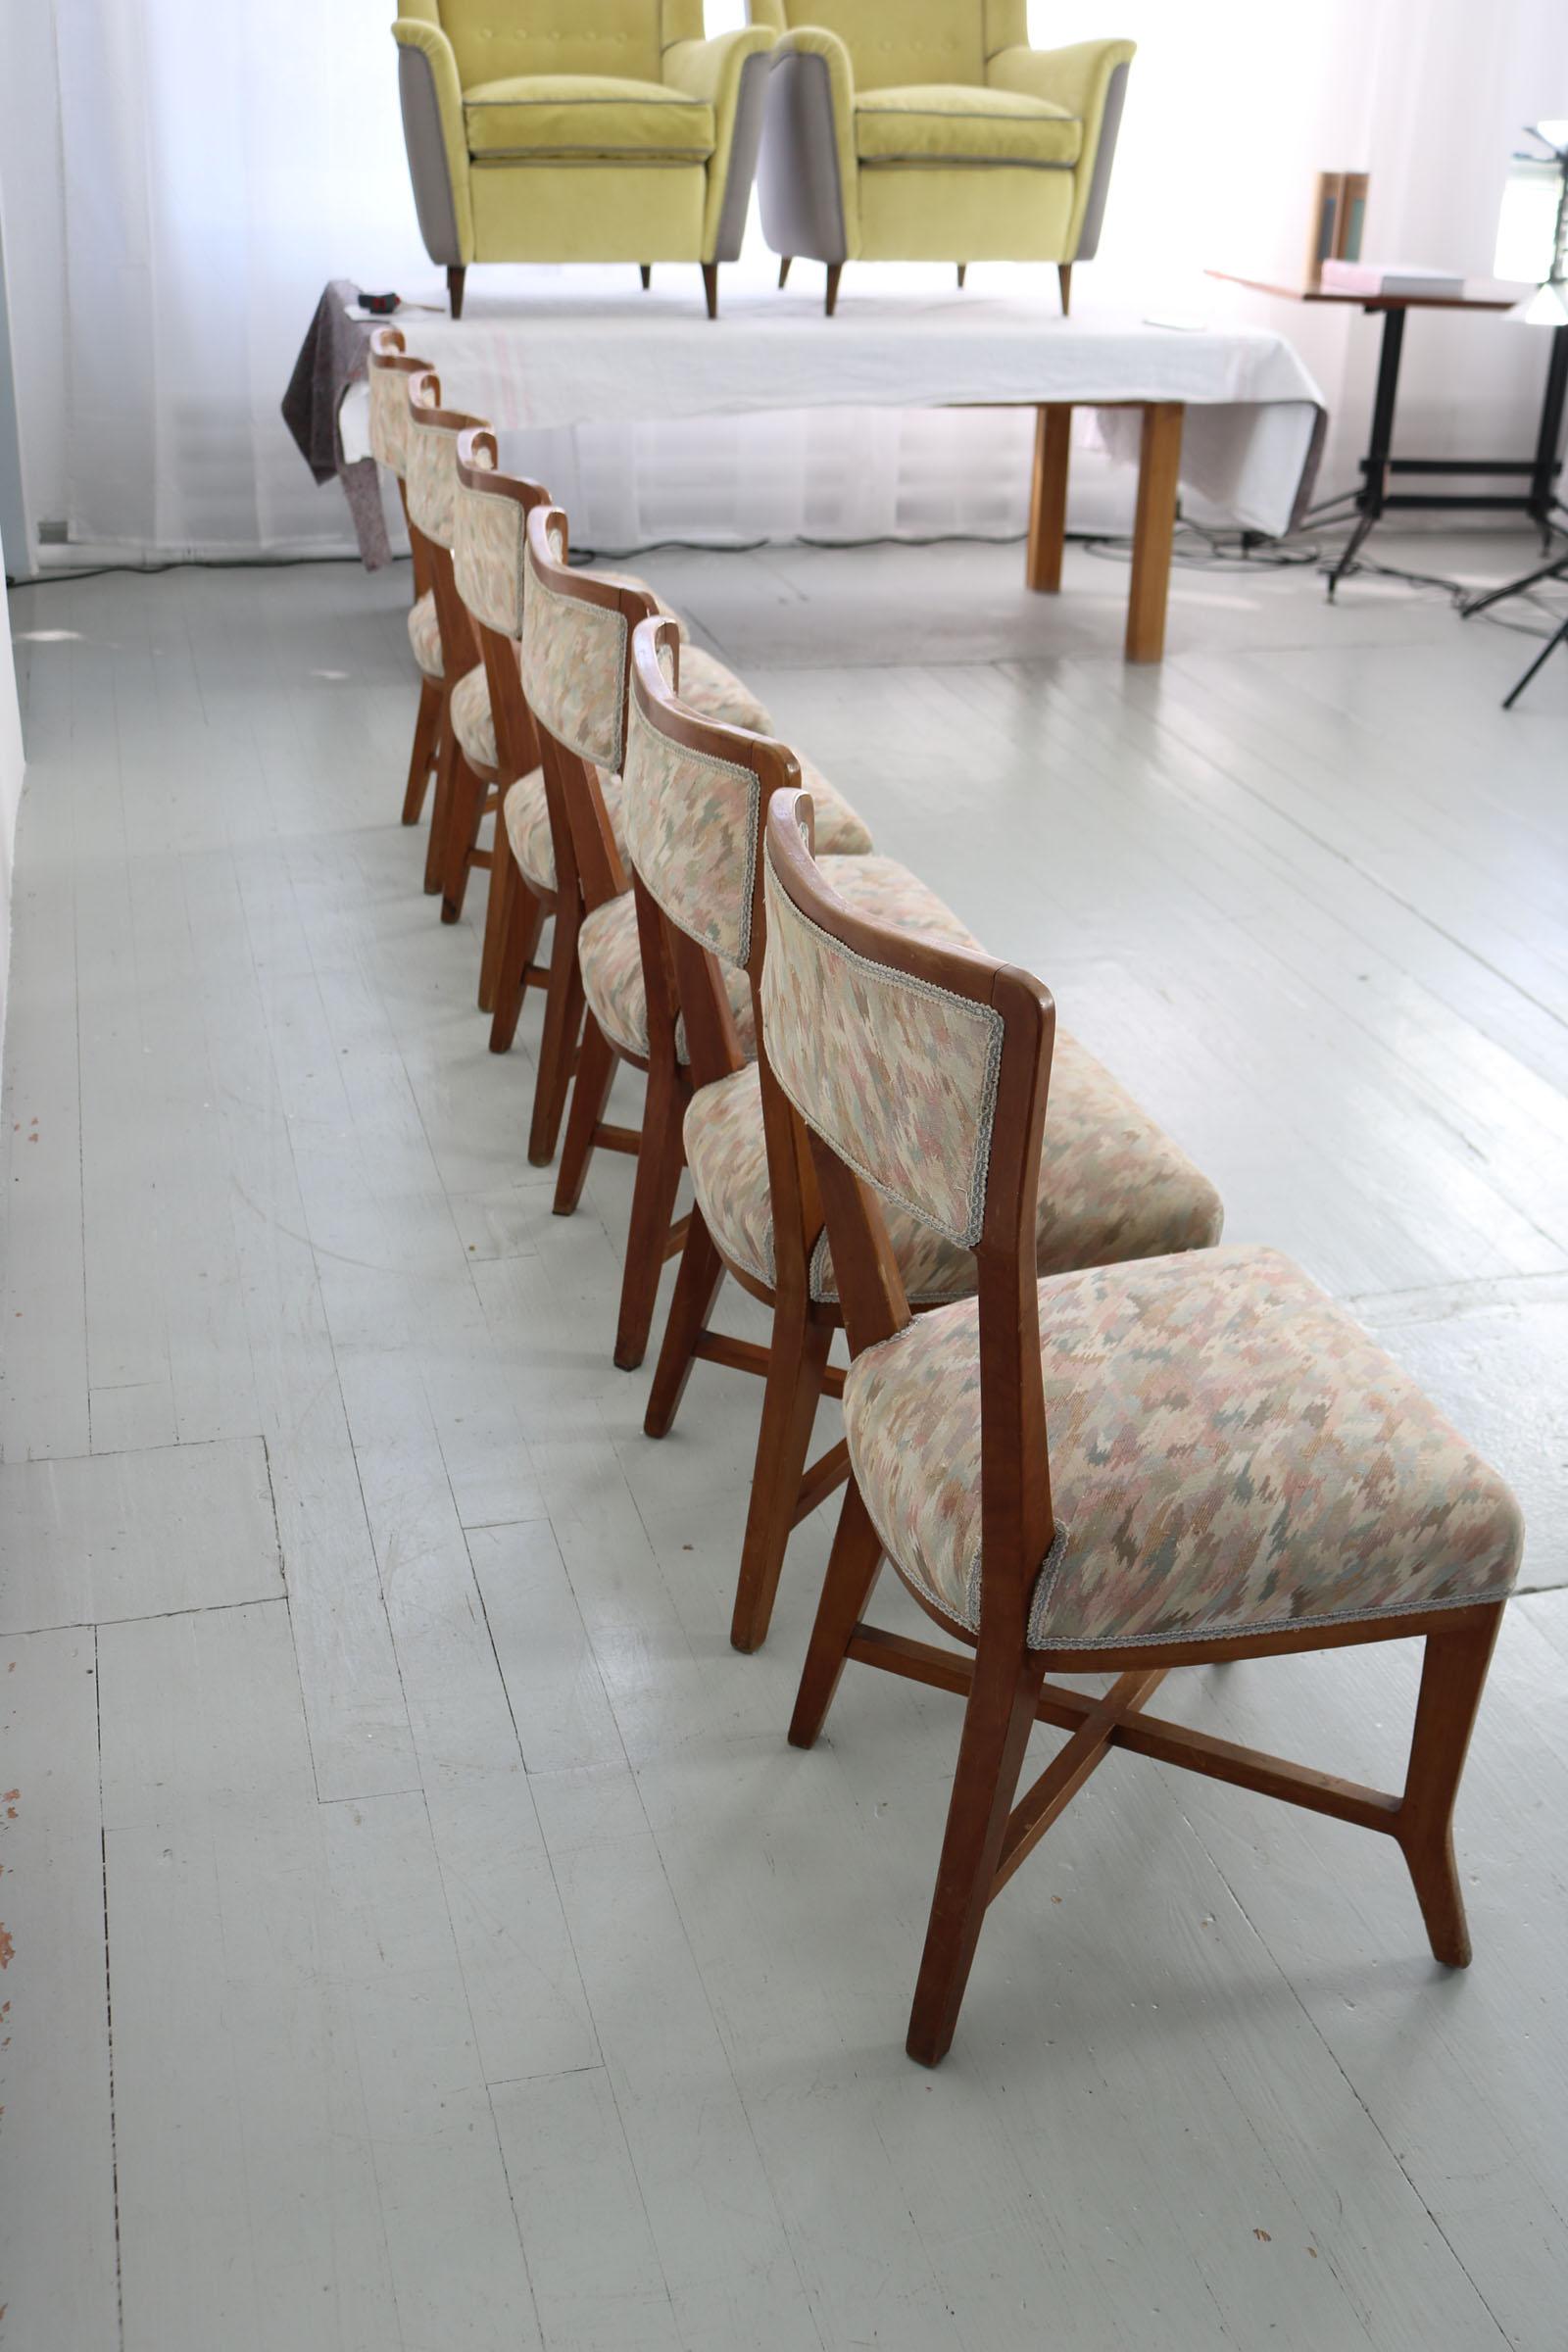 Set of 6 Melchiorre Bega Chairs Made of Cherrywood, Italy, 1950s For Sale 9